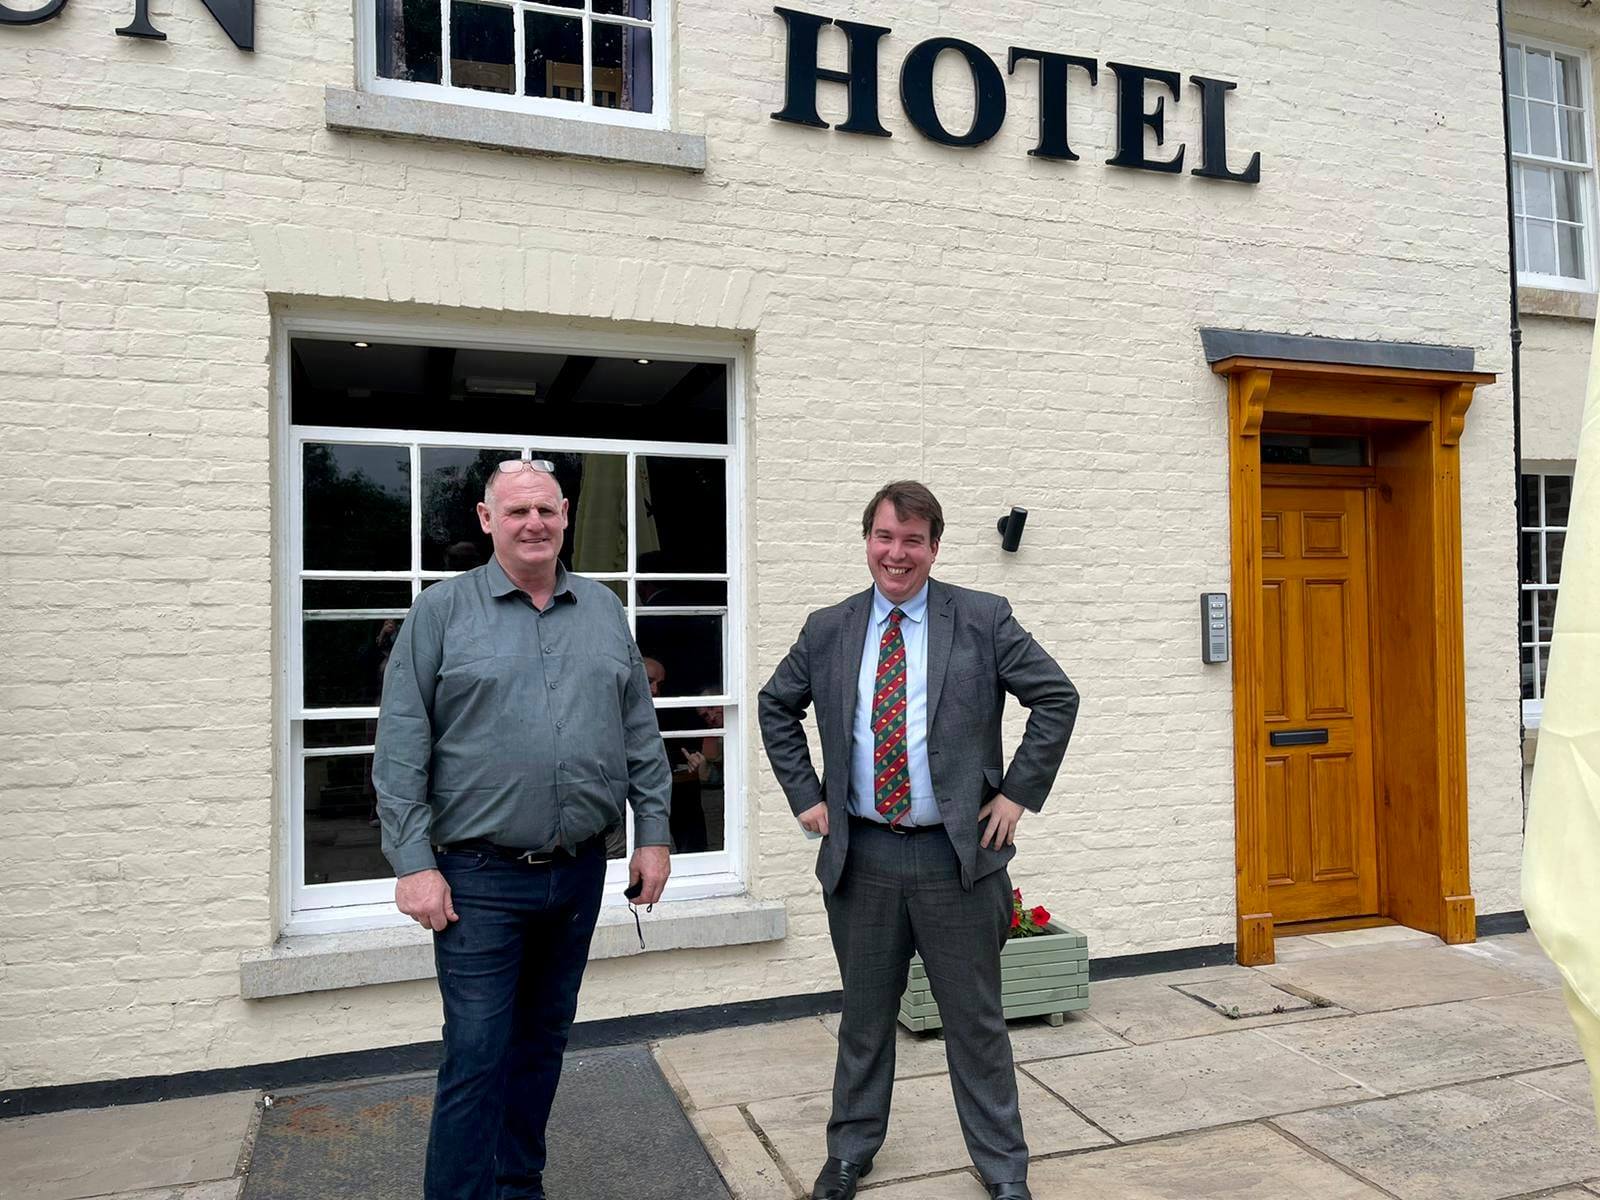 Craig with Gwynfor Thomas, County Councillor for Llansantffraid, outside of the newly reopened Sun Hotel in Llansantffraid.